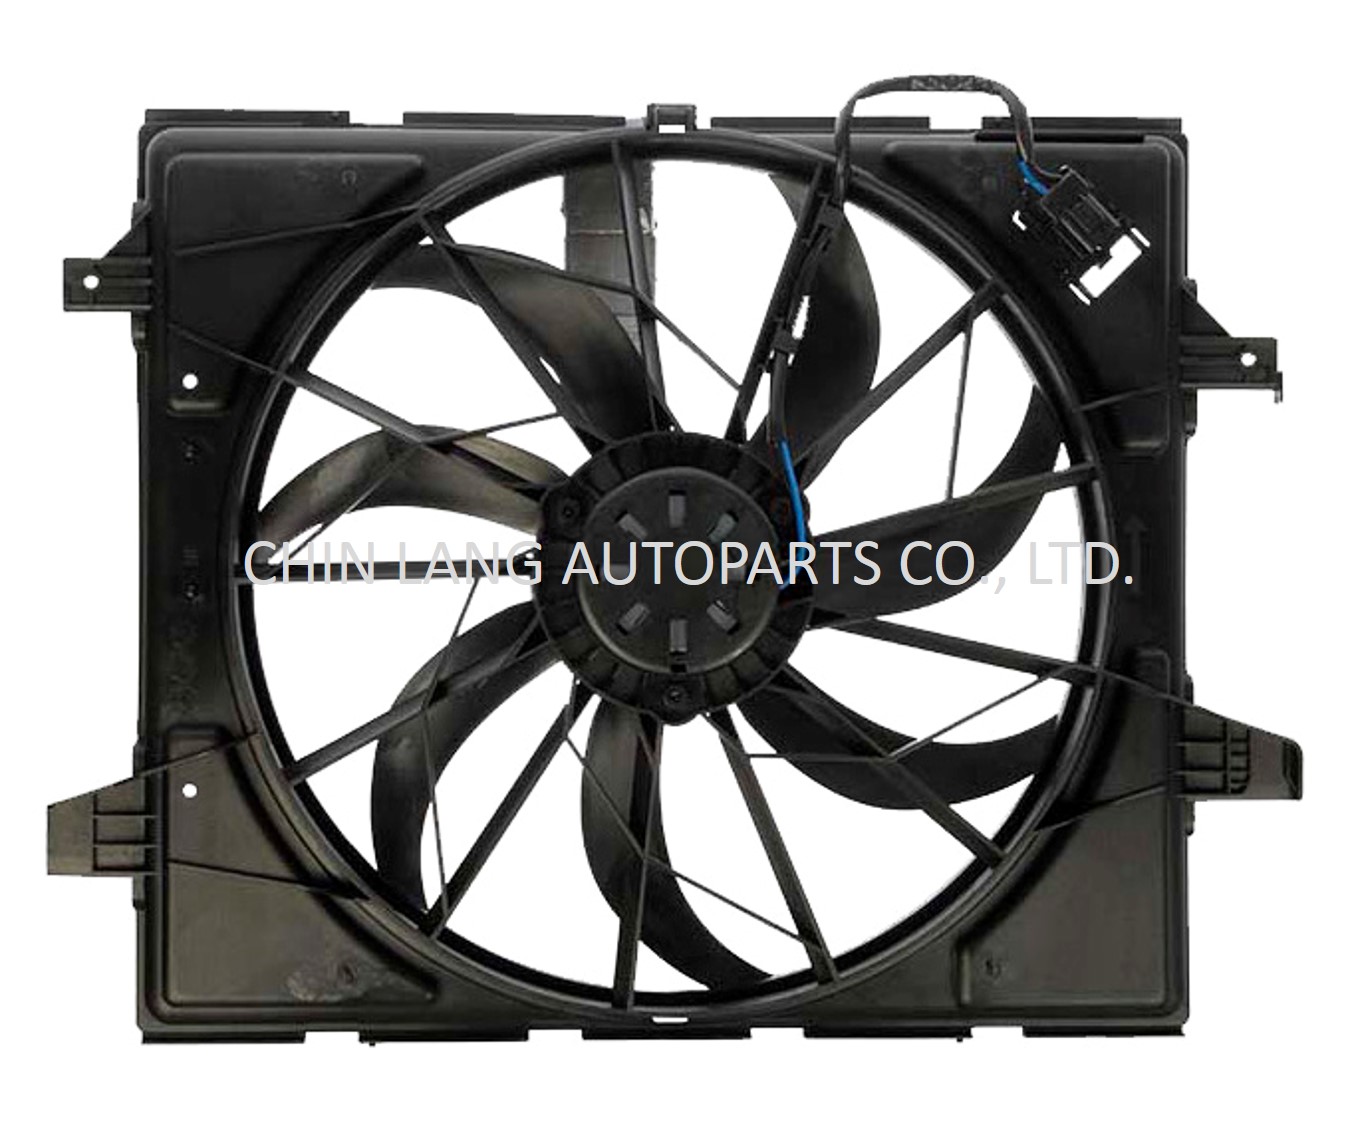 COOLING FAN FOR CHRYSLER JEEP GRAND CHEROKEE 3.6L, 5.7L 2011~ DODGE DURANGO 2011-CL-4904G